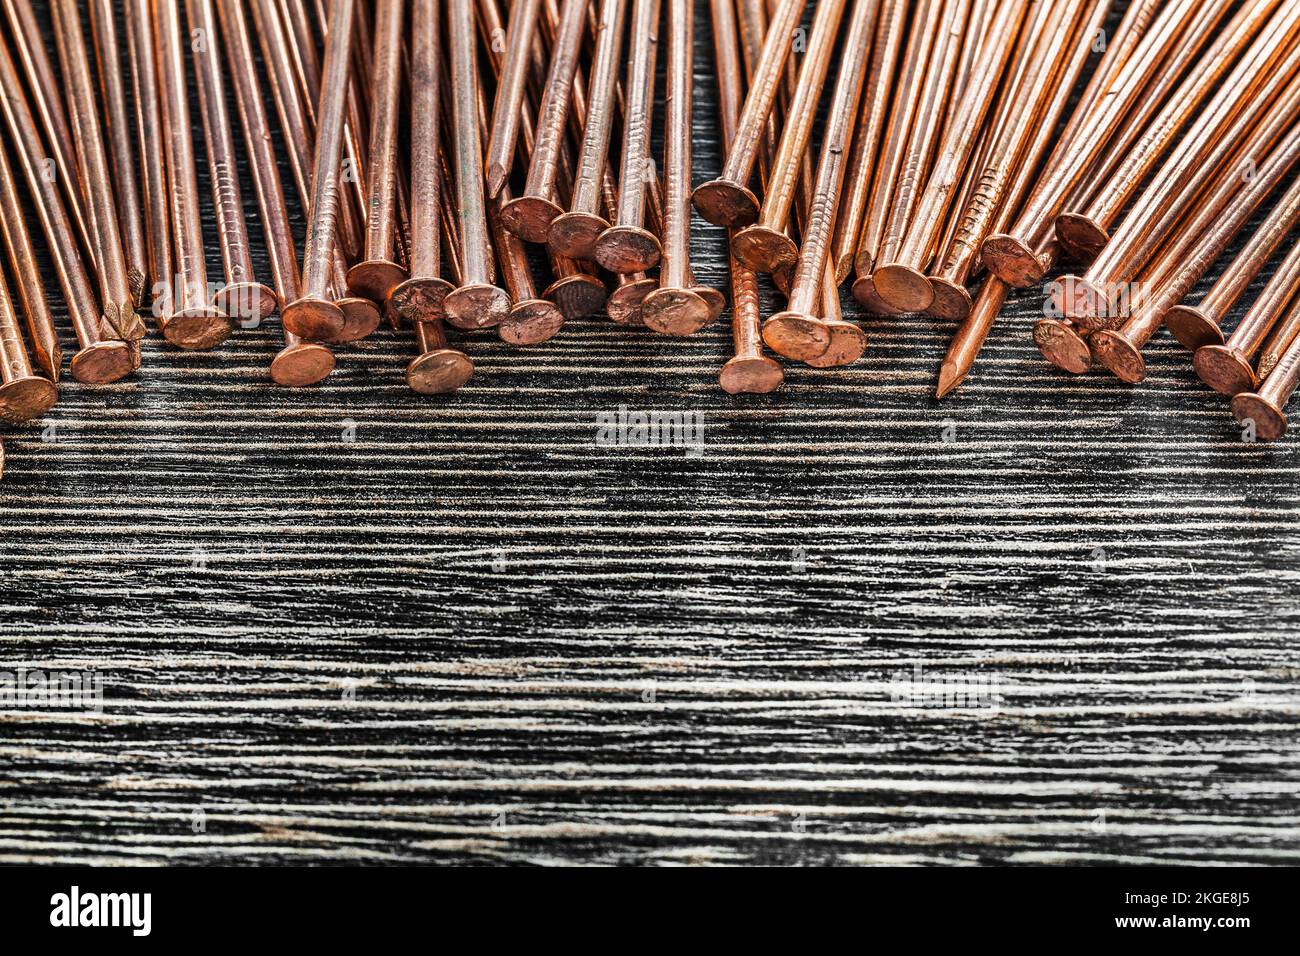 Heap of copper nails on wooden board. Stock Photo